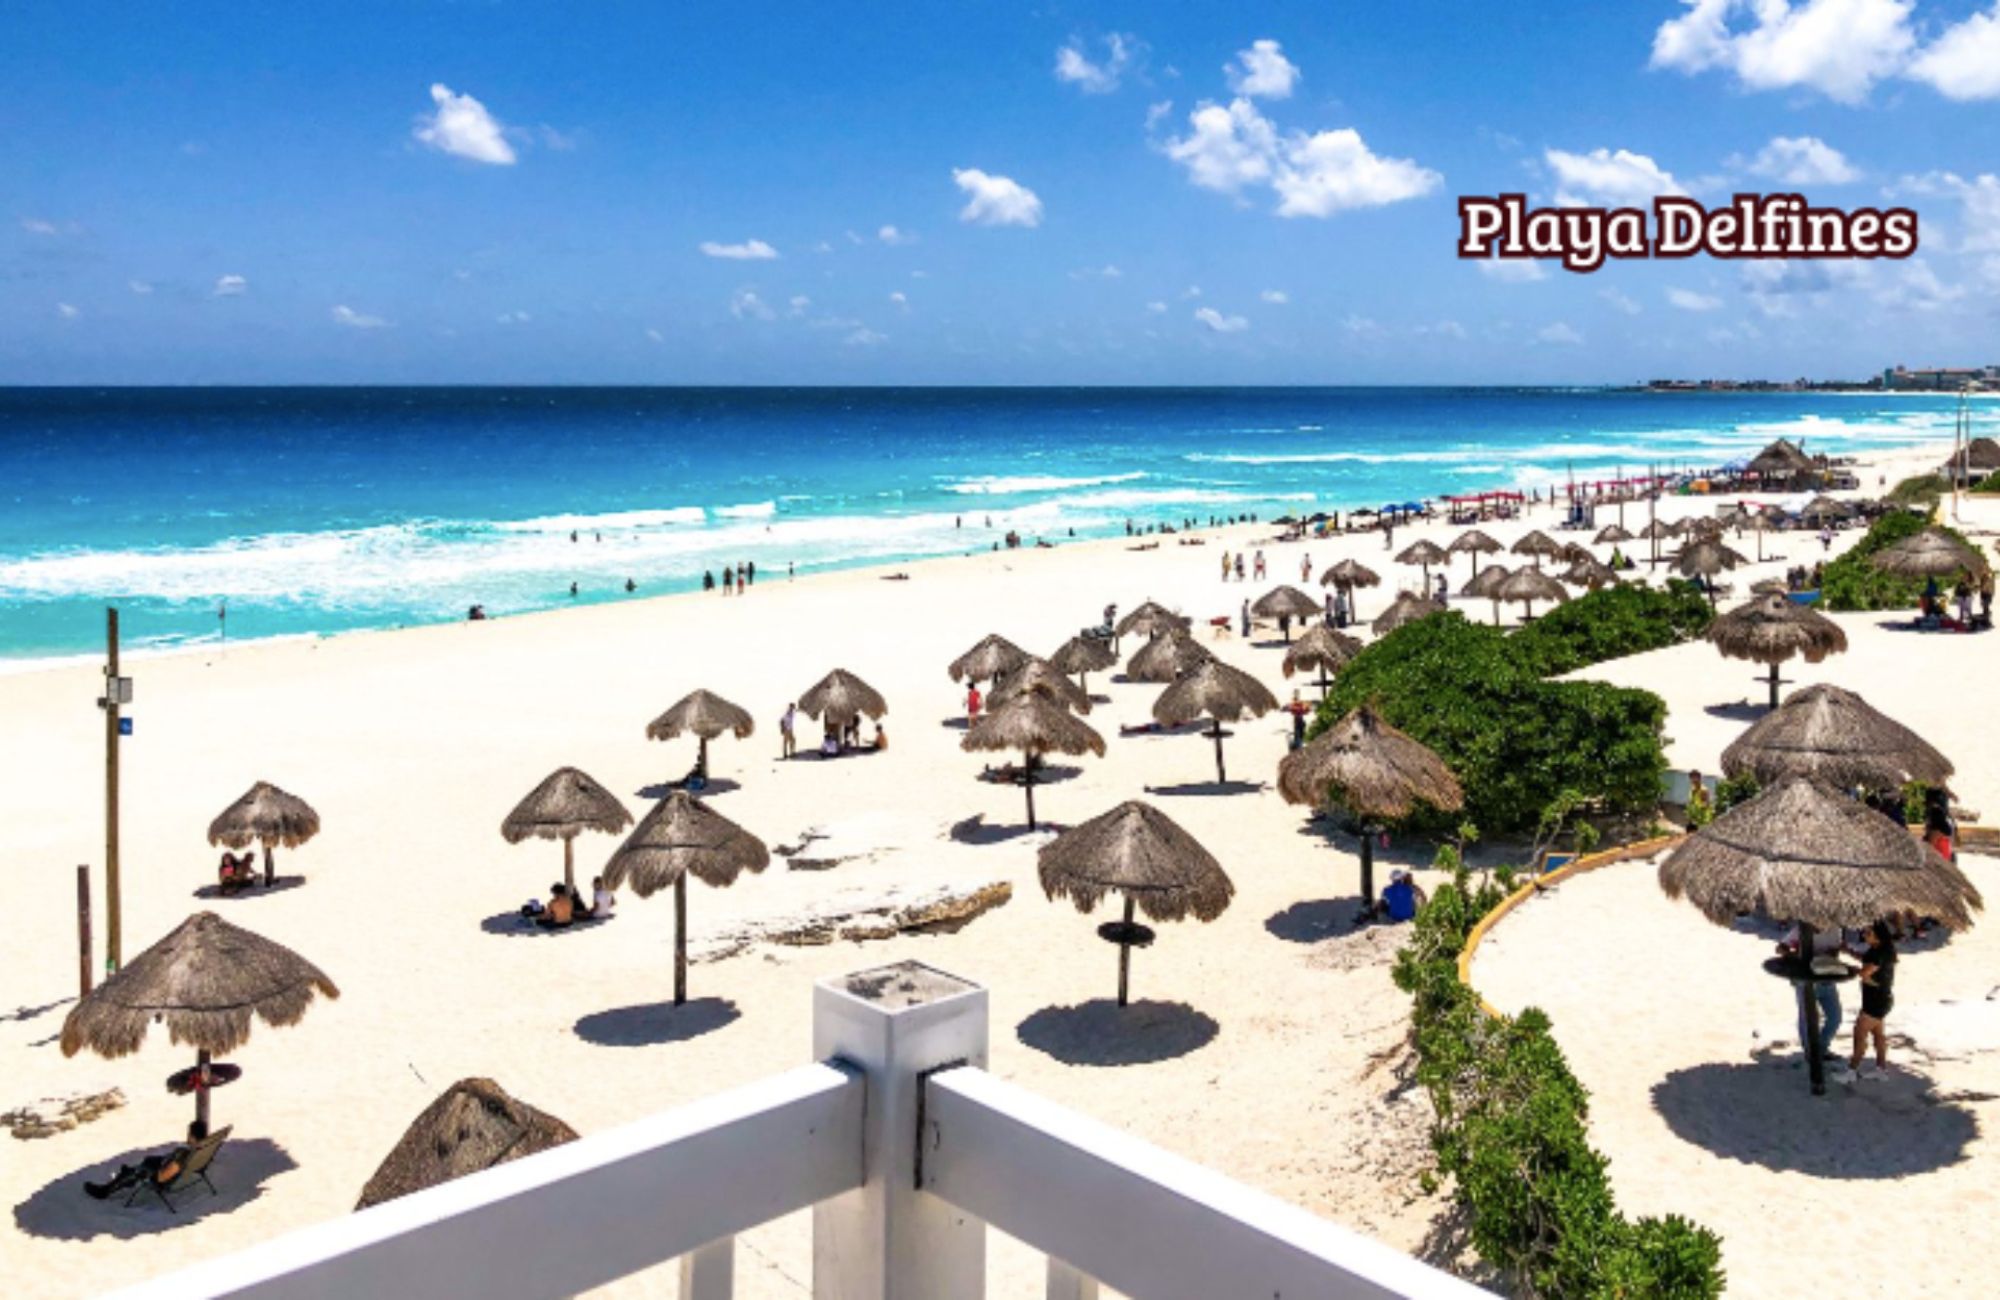 Apartment with terrace, Pool, Jacuzzi and more amenities for sale, Hotel Las Americas, Cancun.